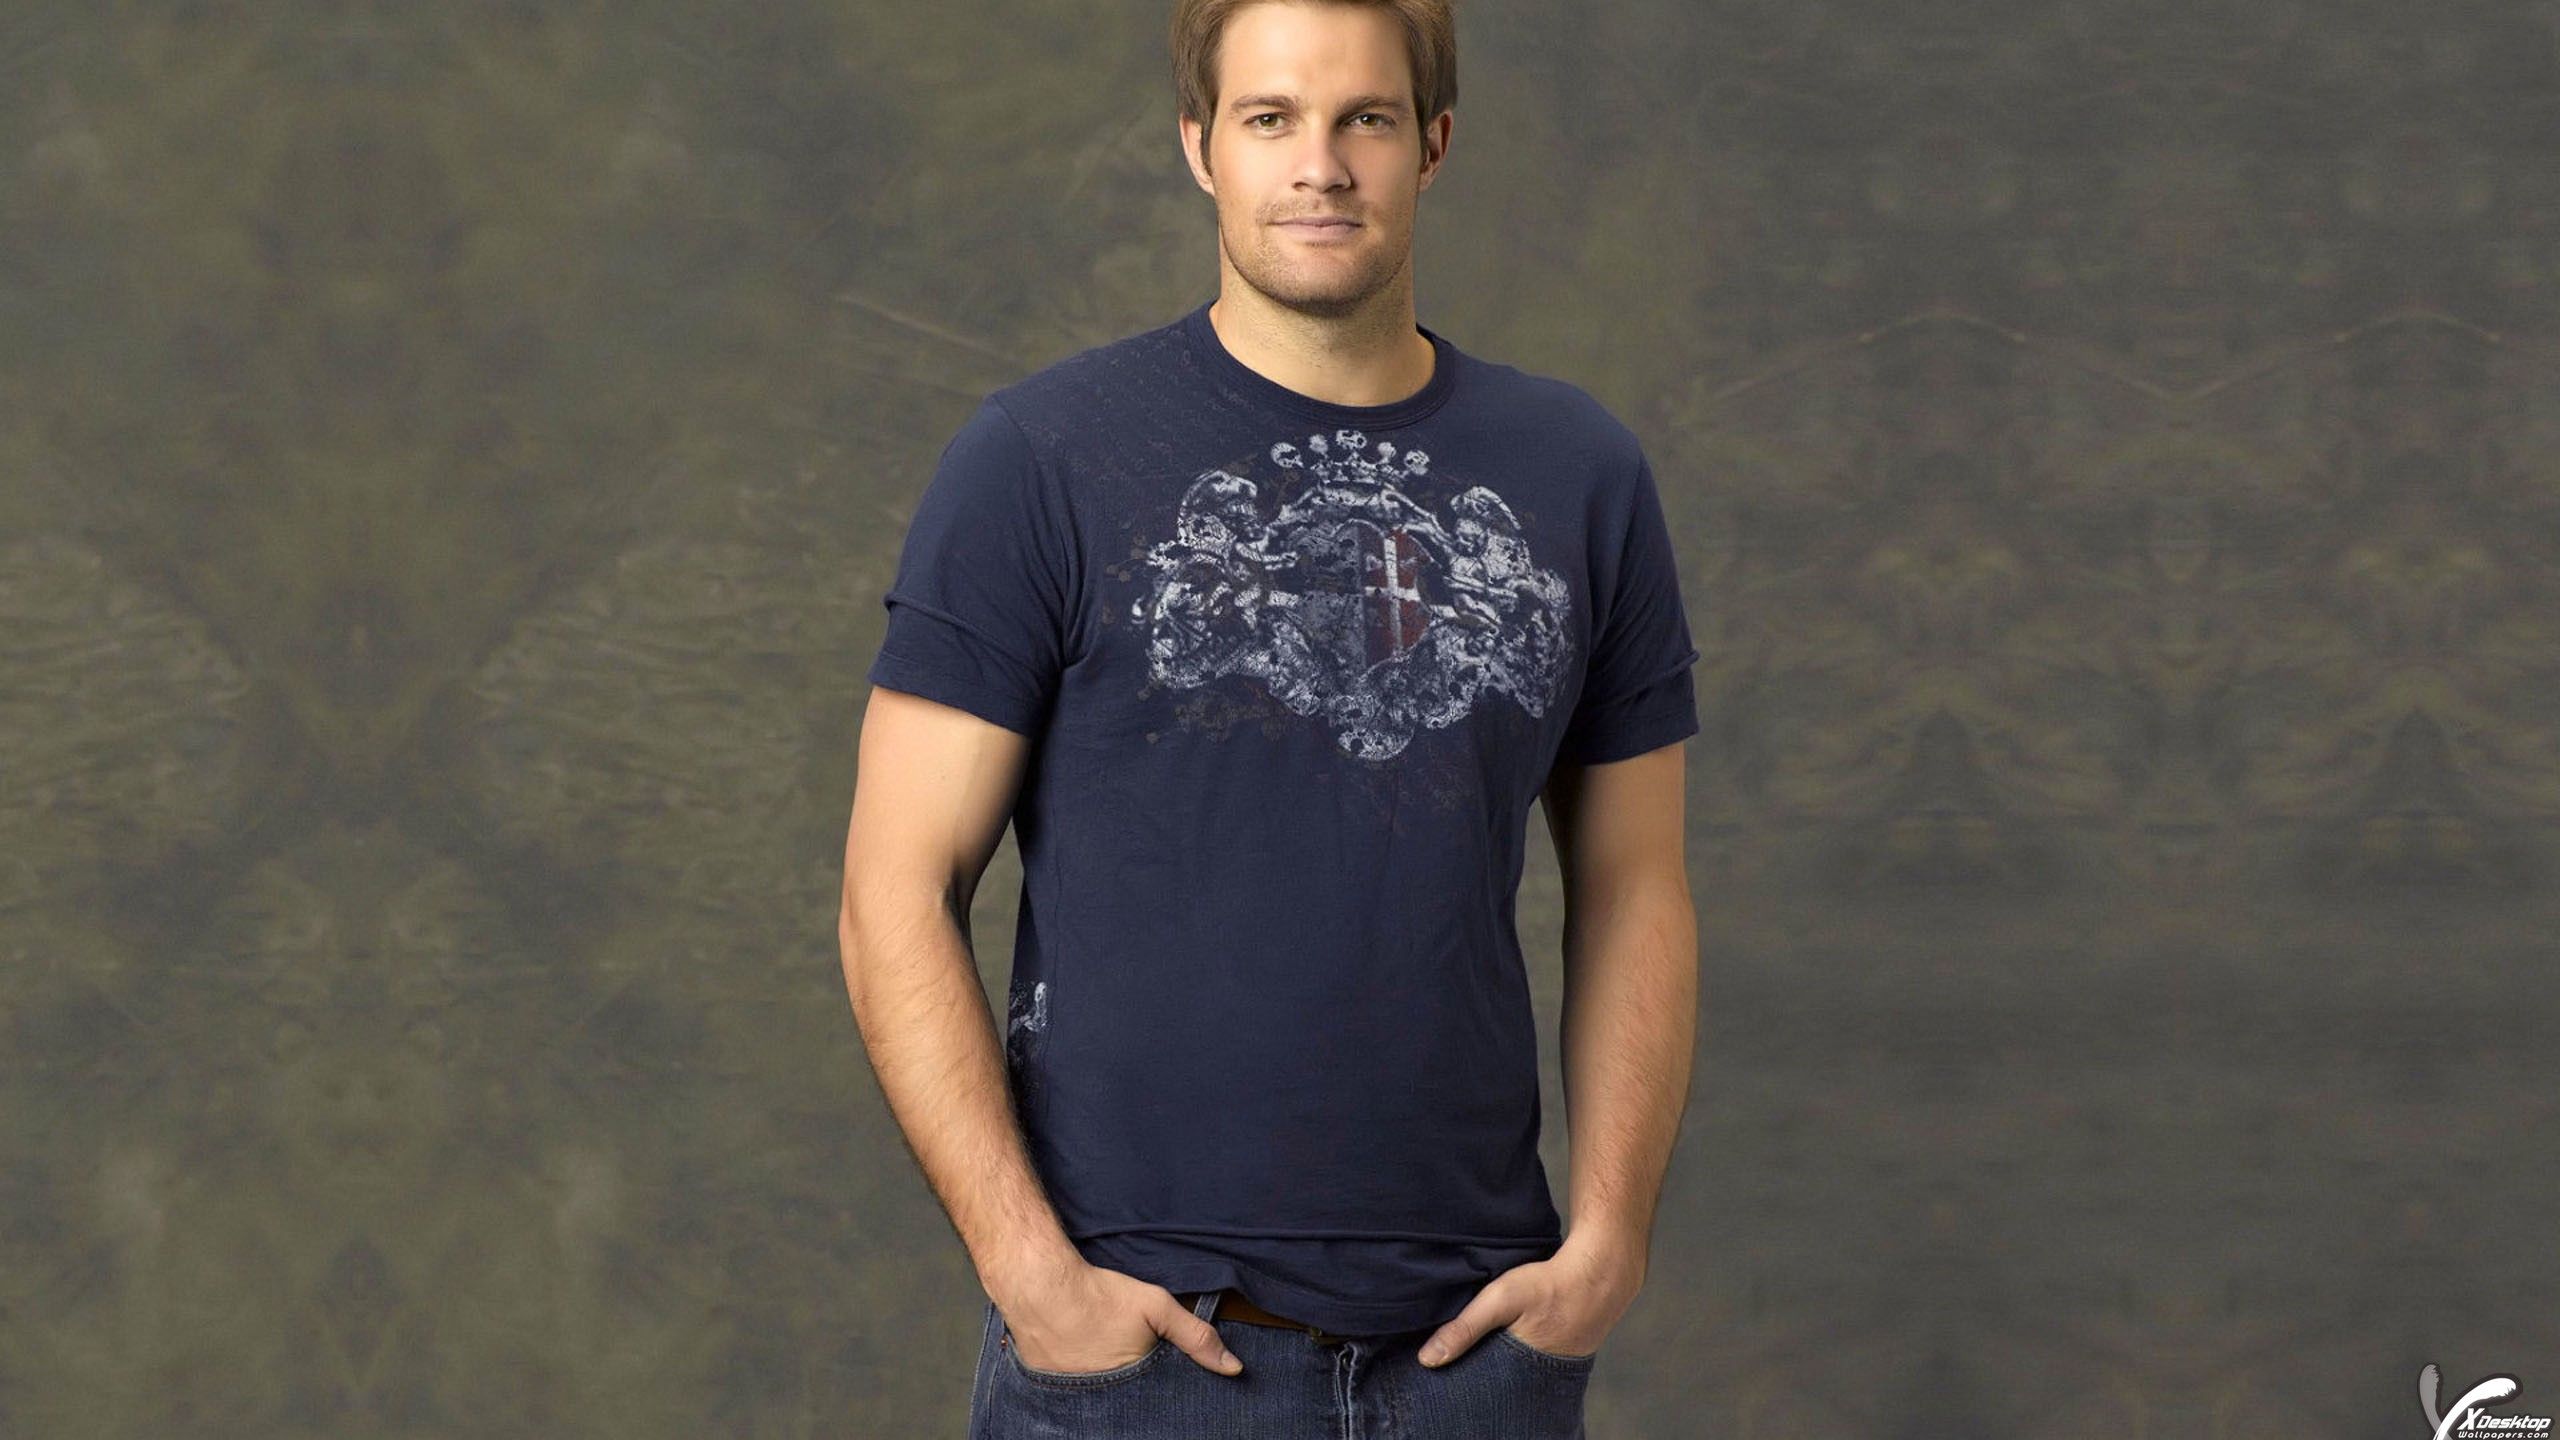 Geoff Stults Wallpapers, Photos & Image in HD.